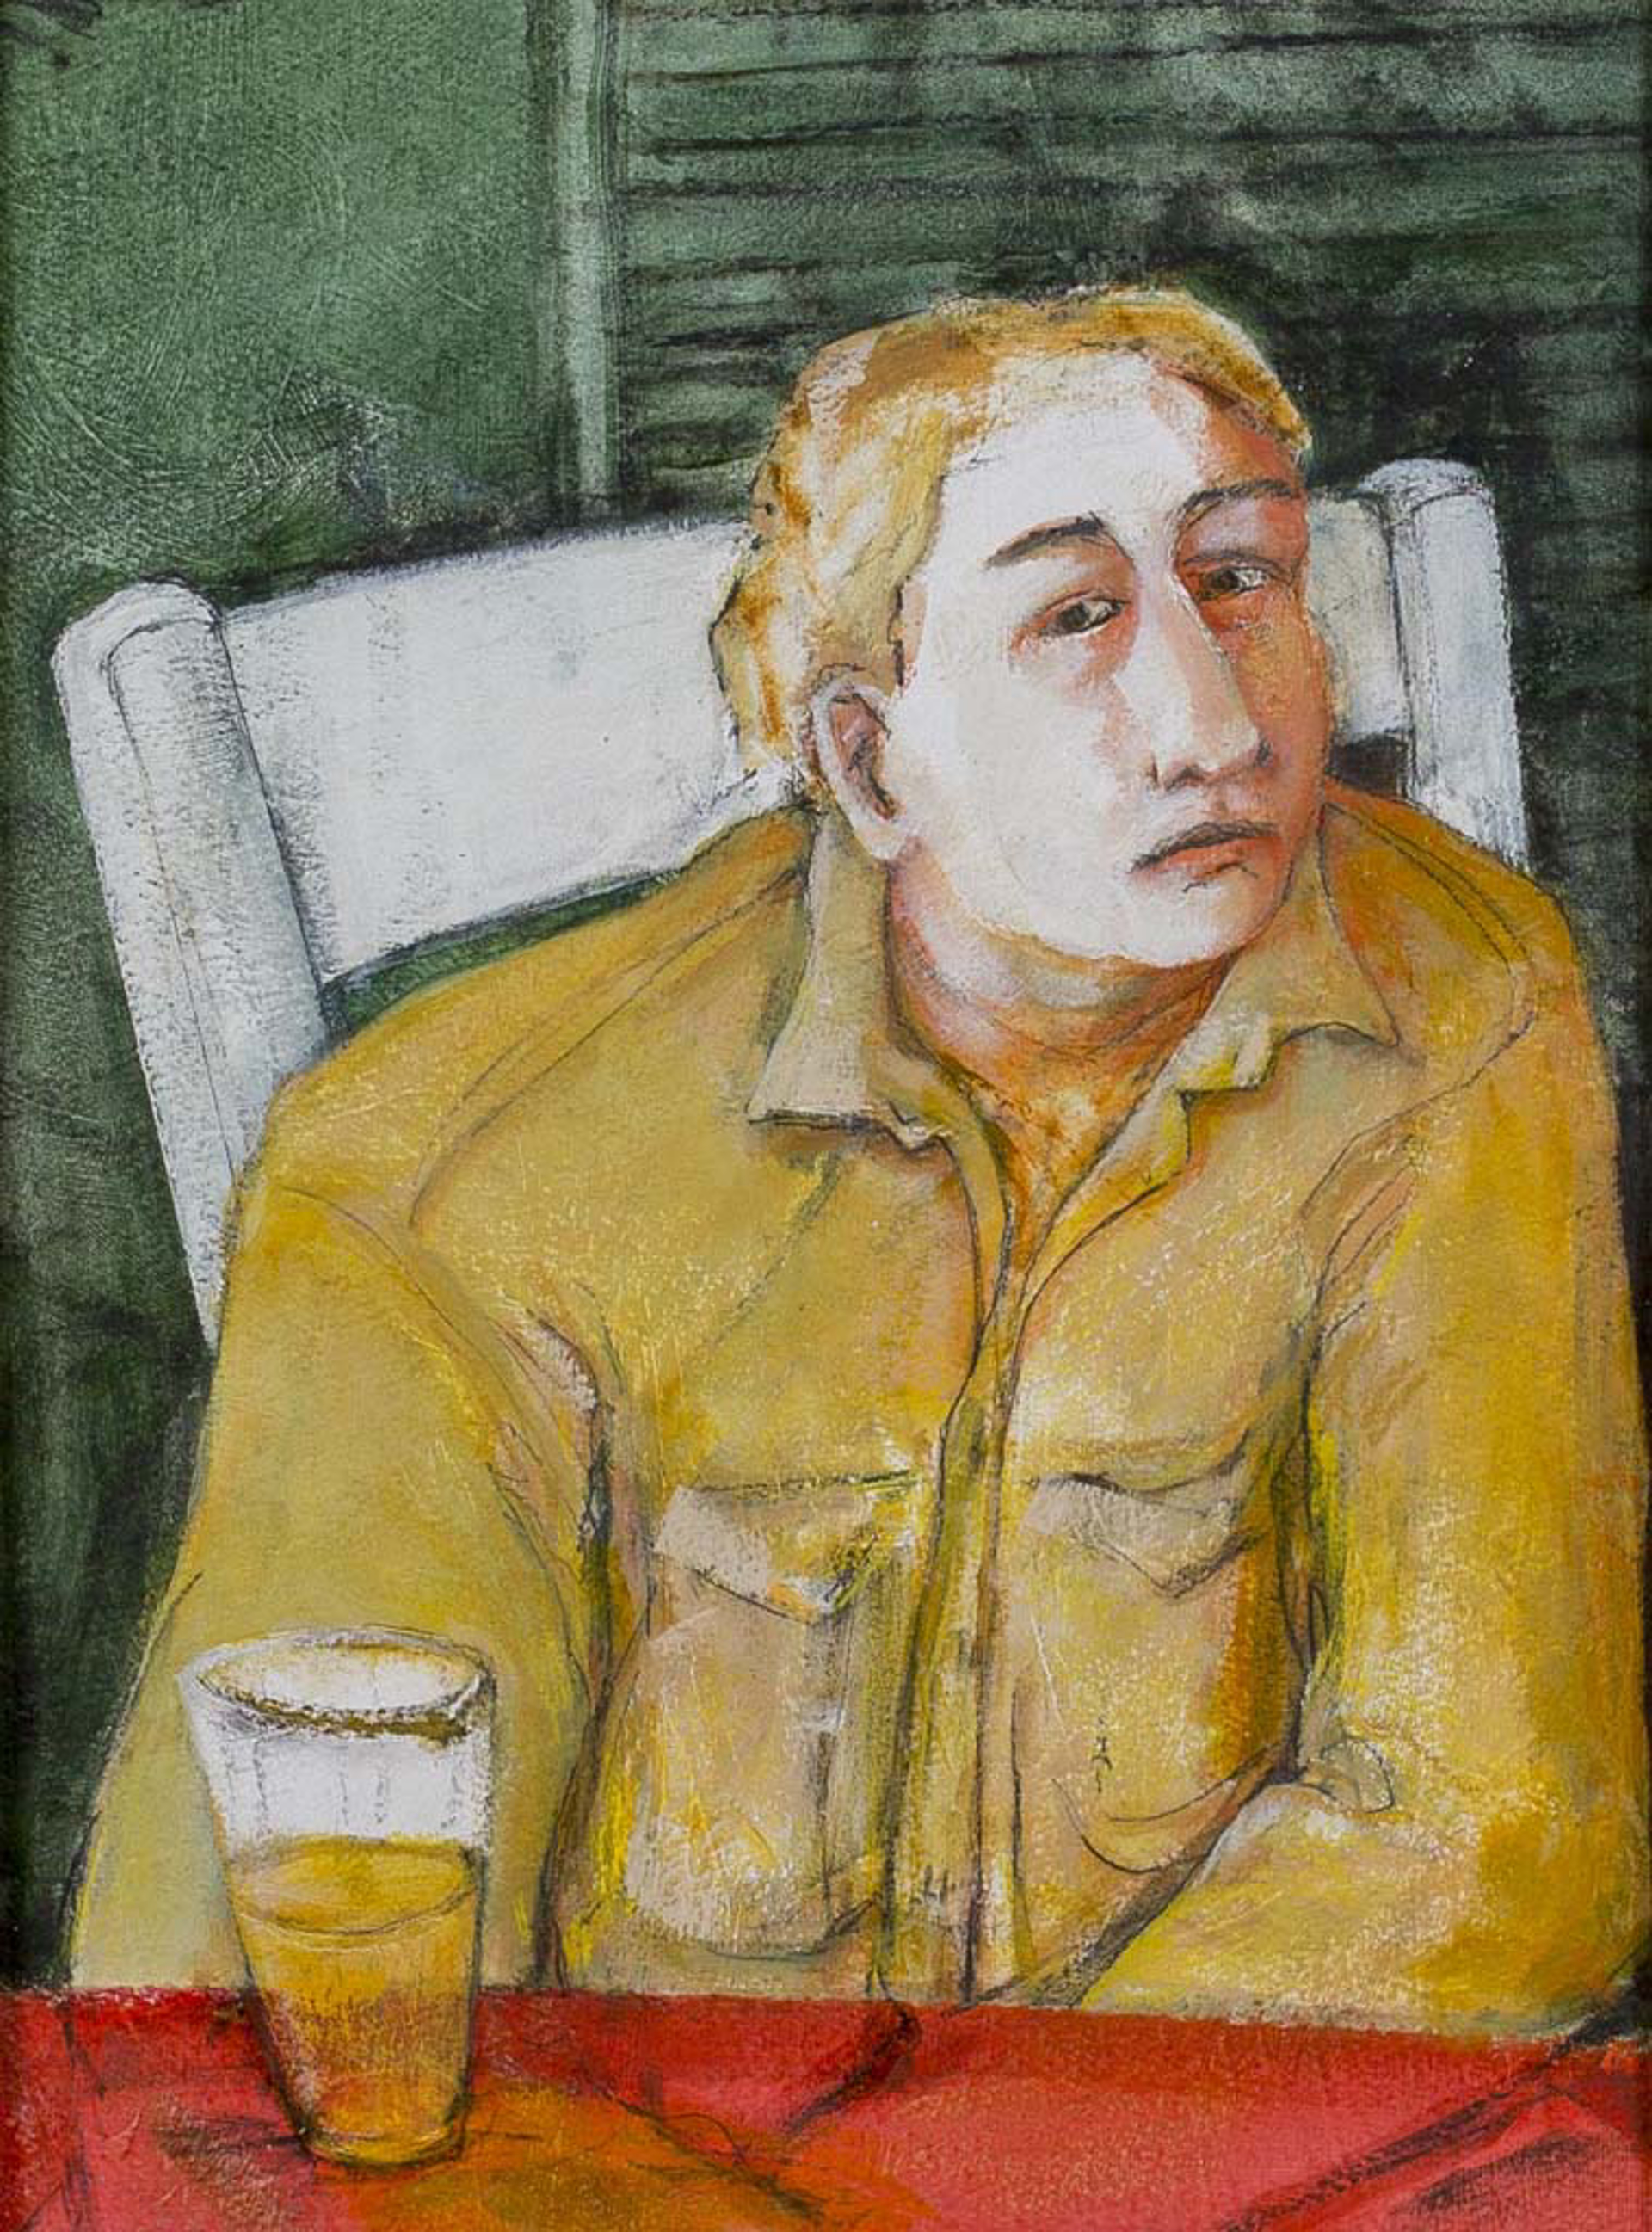 Man with a Beer by Eve Whitaker